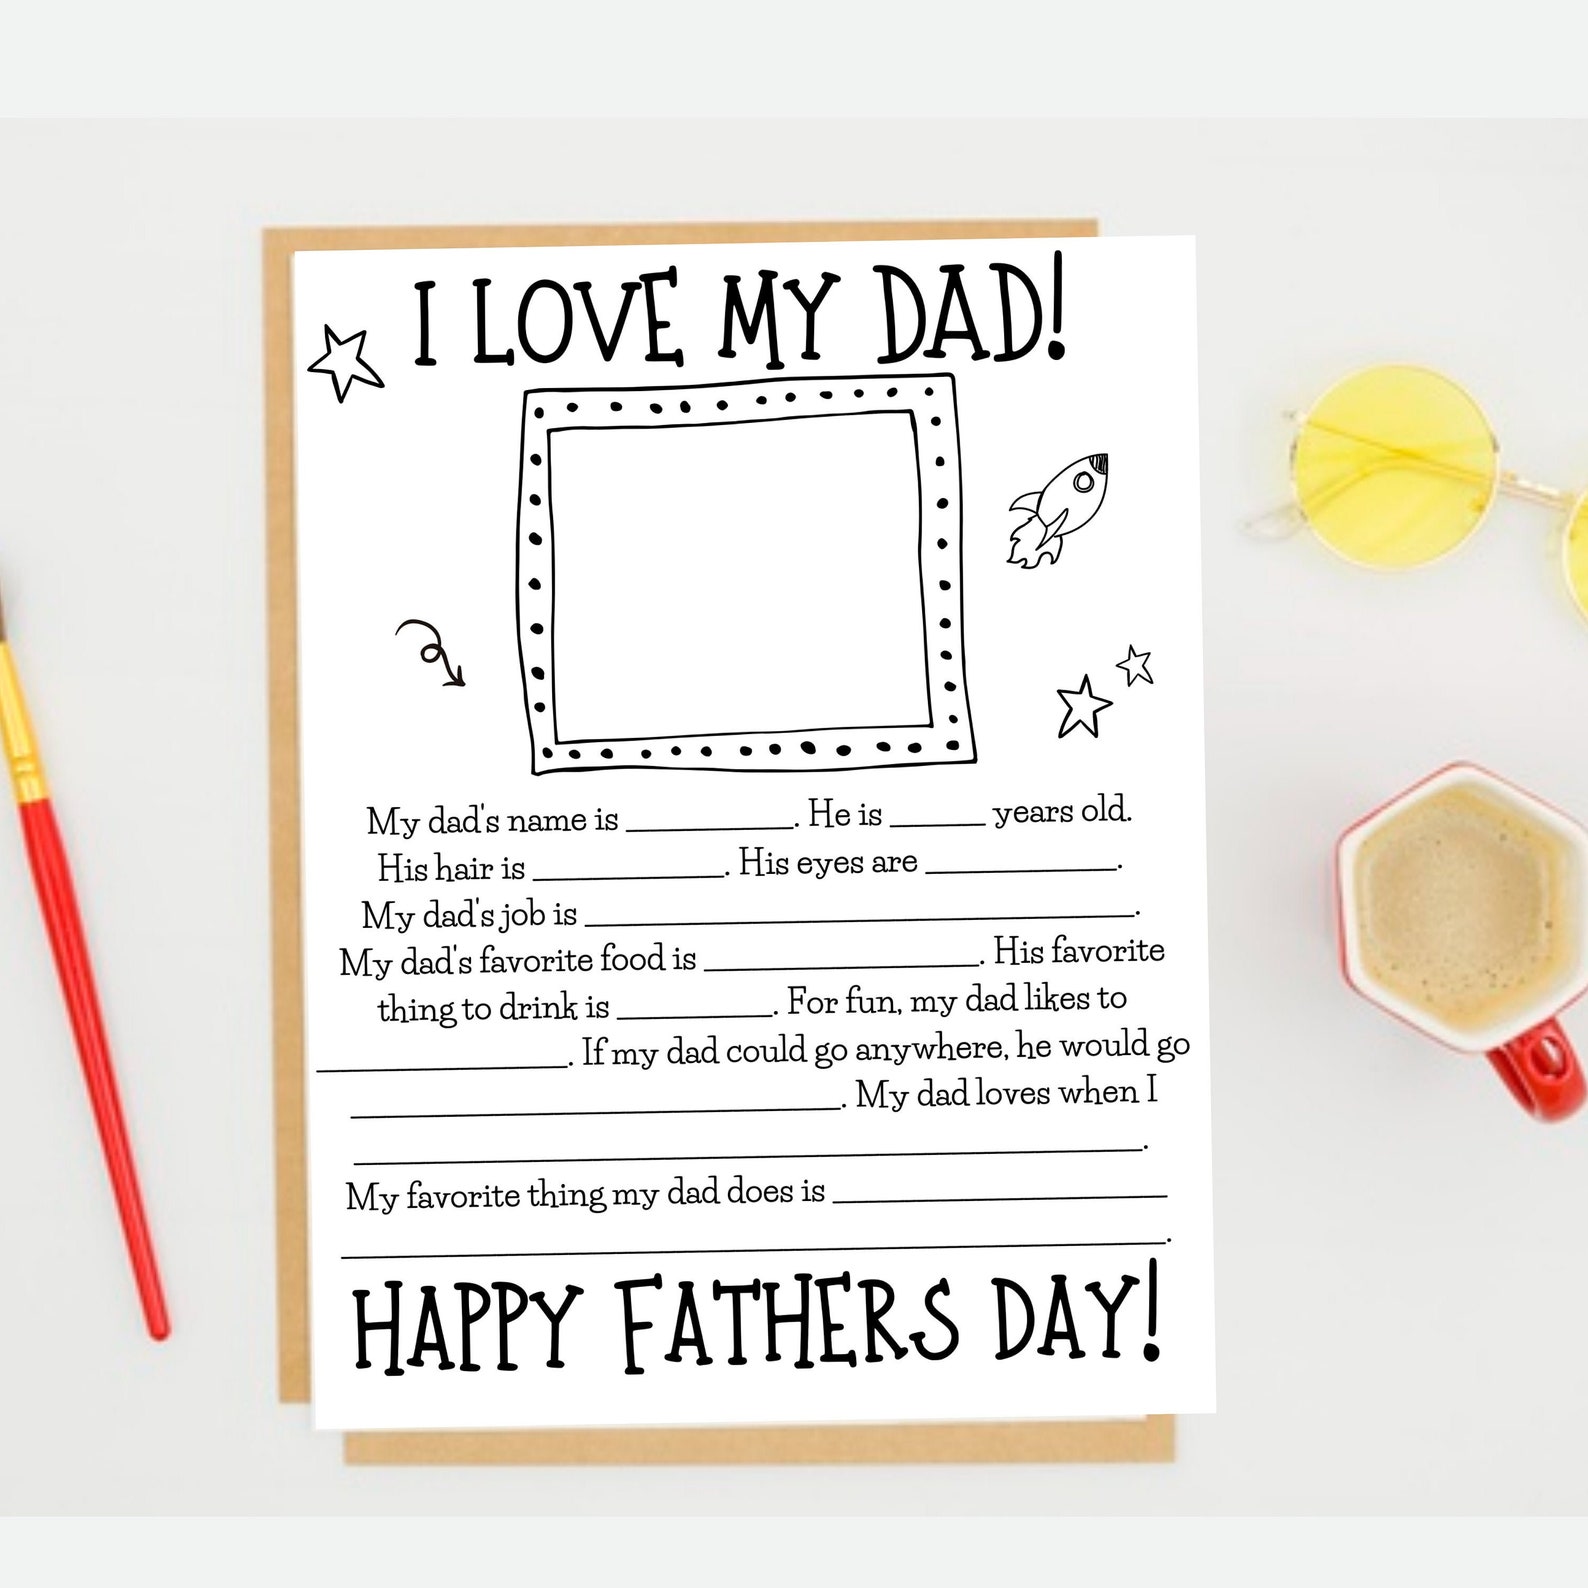 About My Dad Printable Pdf Free Download